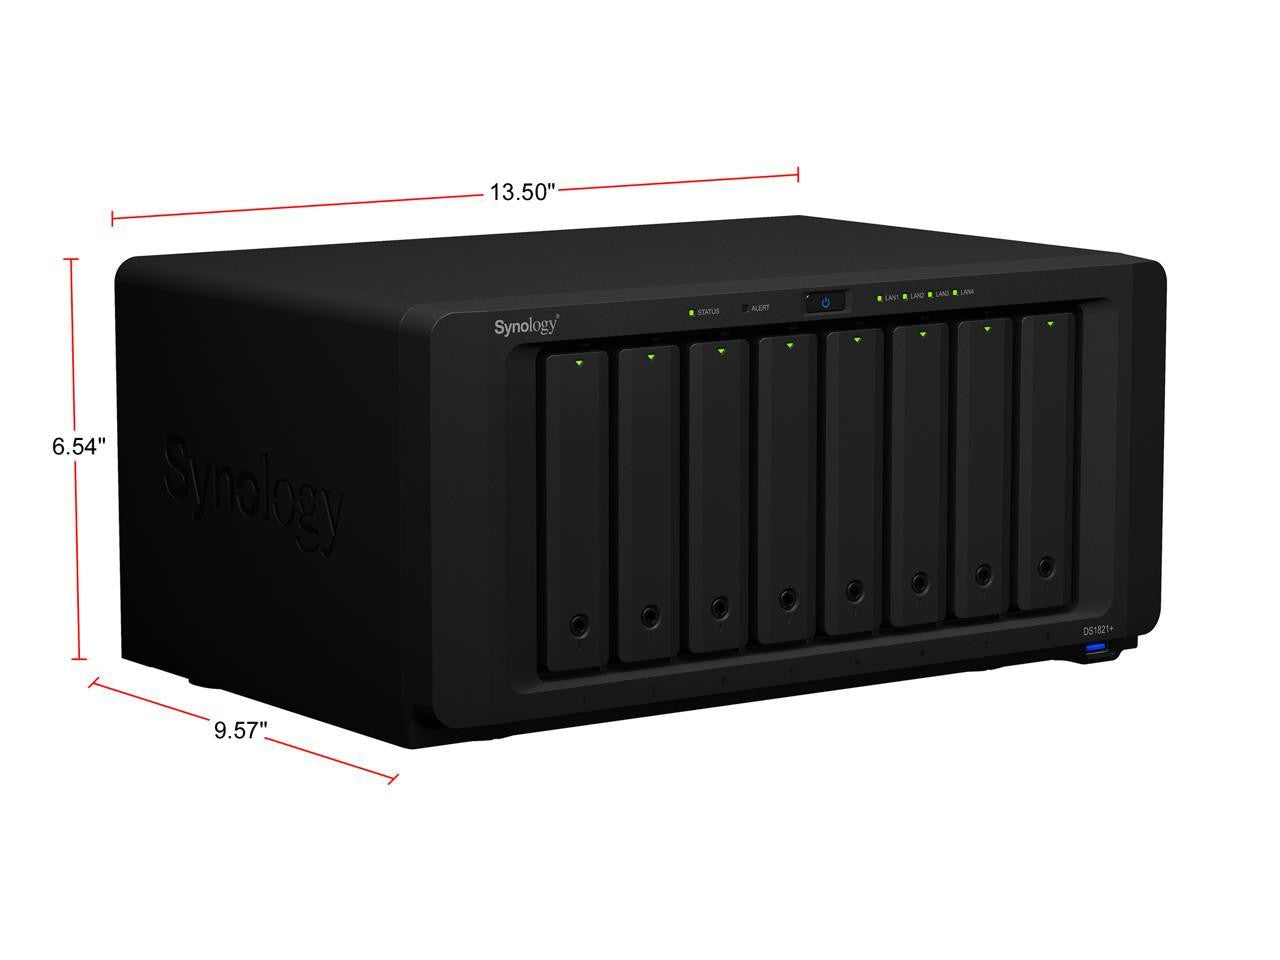 Synology DS1821+ 8-BAY DiskStation with 4GB Synology RAM and 96TB (8x12TB) Western Digital RED PLUS Drives Fully Assembled and Tested